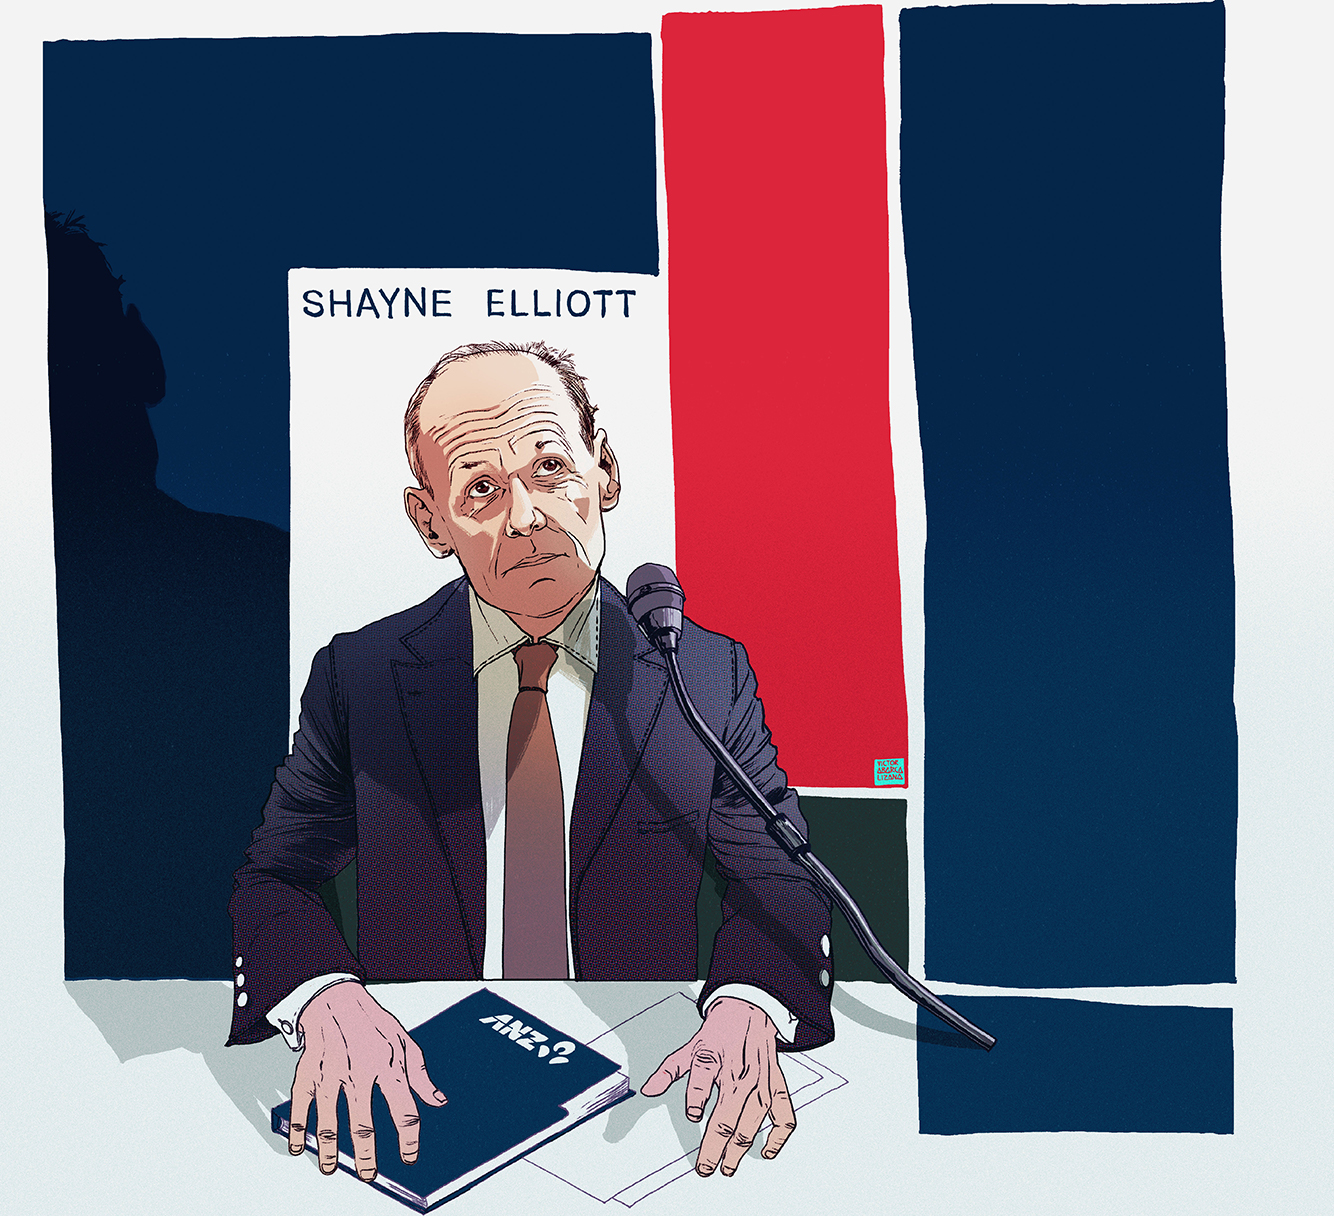 An illustration of Shayne Elliot at a parliamentary committee, he is wearing a suit and has a folder marked 'ANZ'.